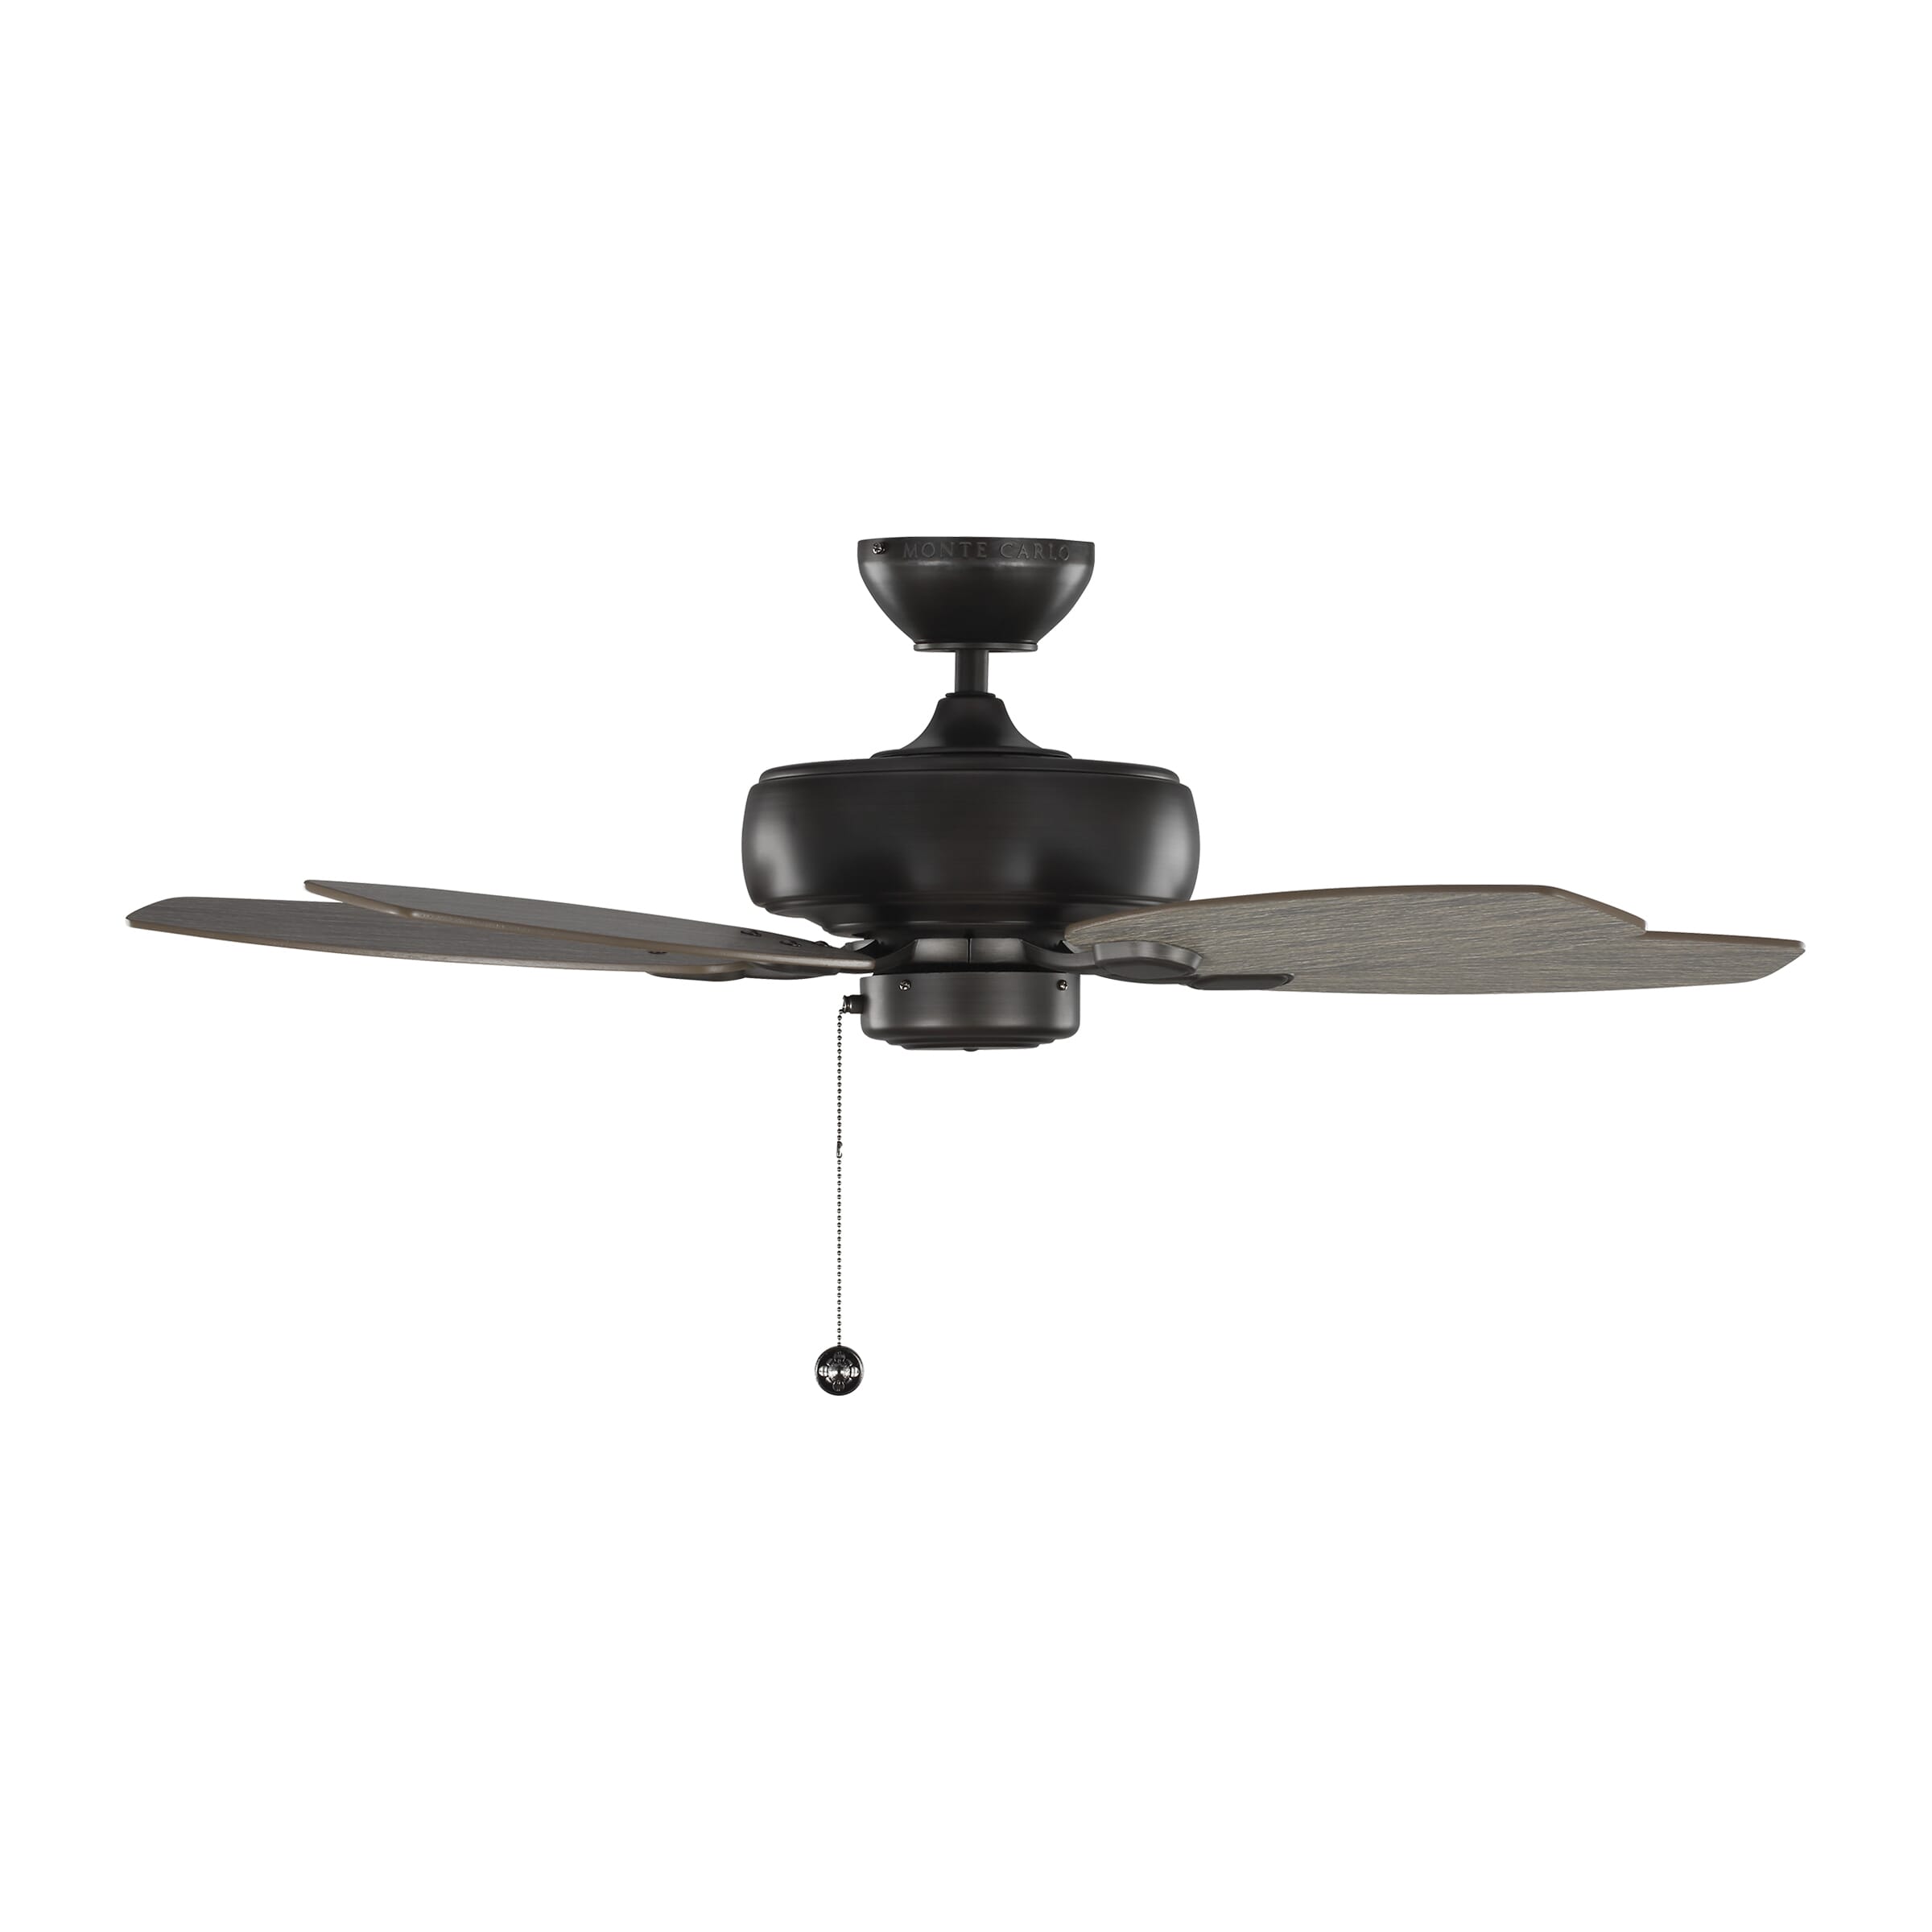 Monte Carlo Centro Max II 44"" Indoor Ceiling Fan in Aged Pewter - 5CQM44AGP -  Visual Comfort Fan